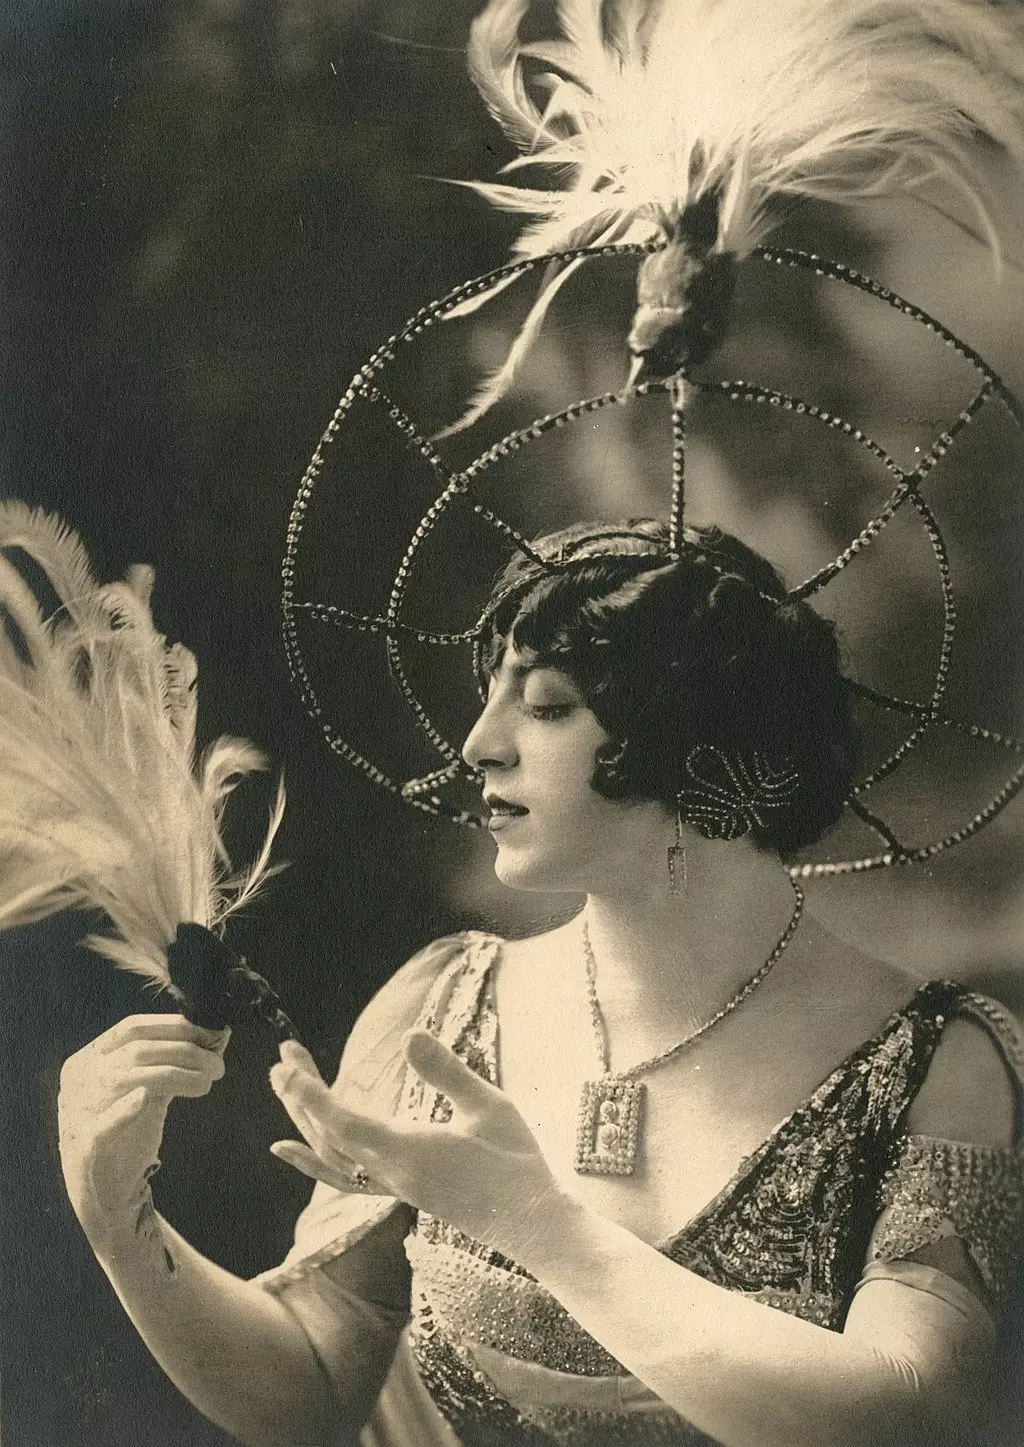 Famous drag artist Francis Renault photographed in 1907, Wikimedia Commons